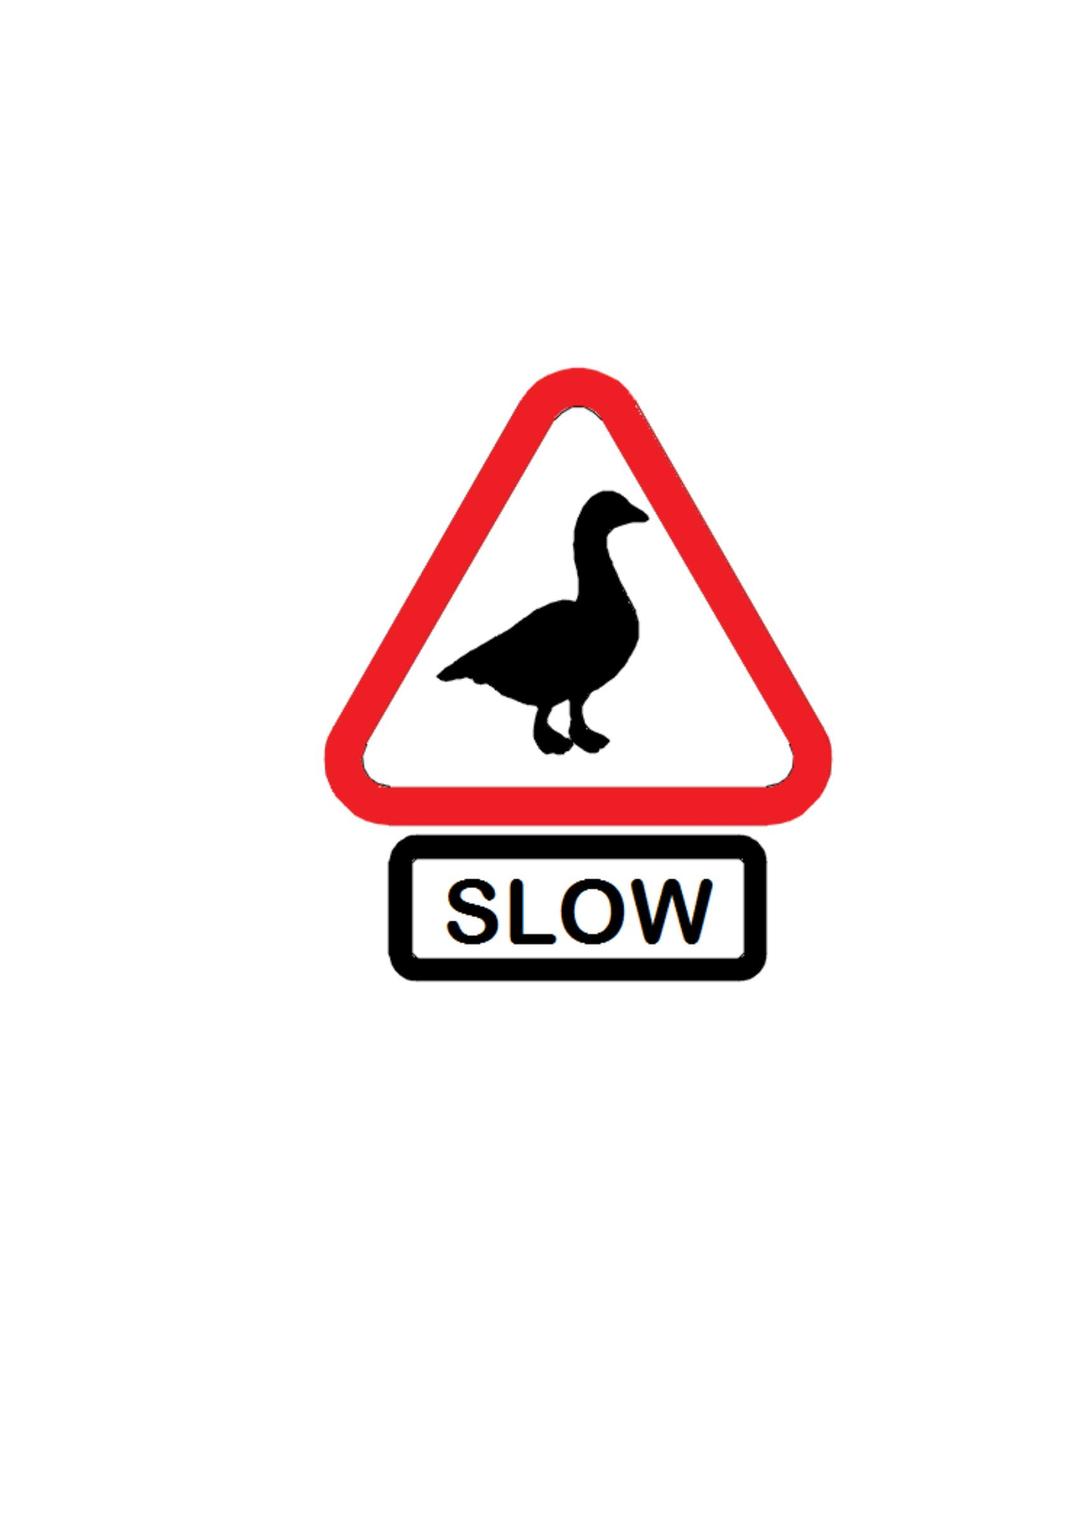 geese - slow png transparent